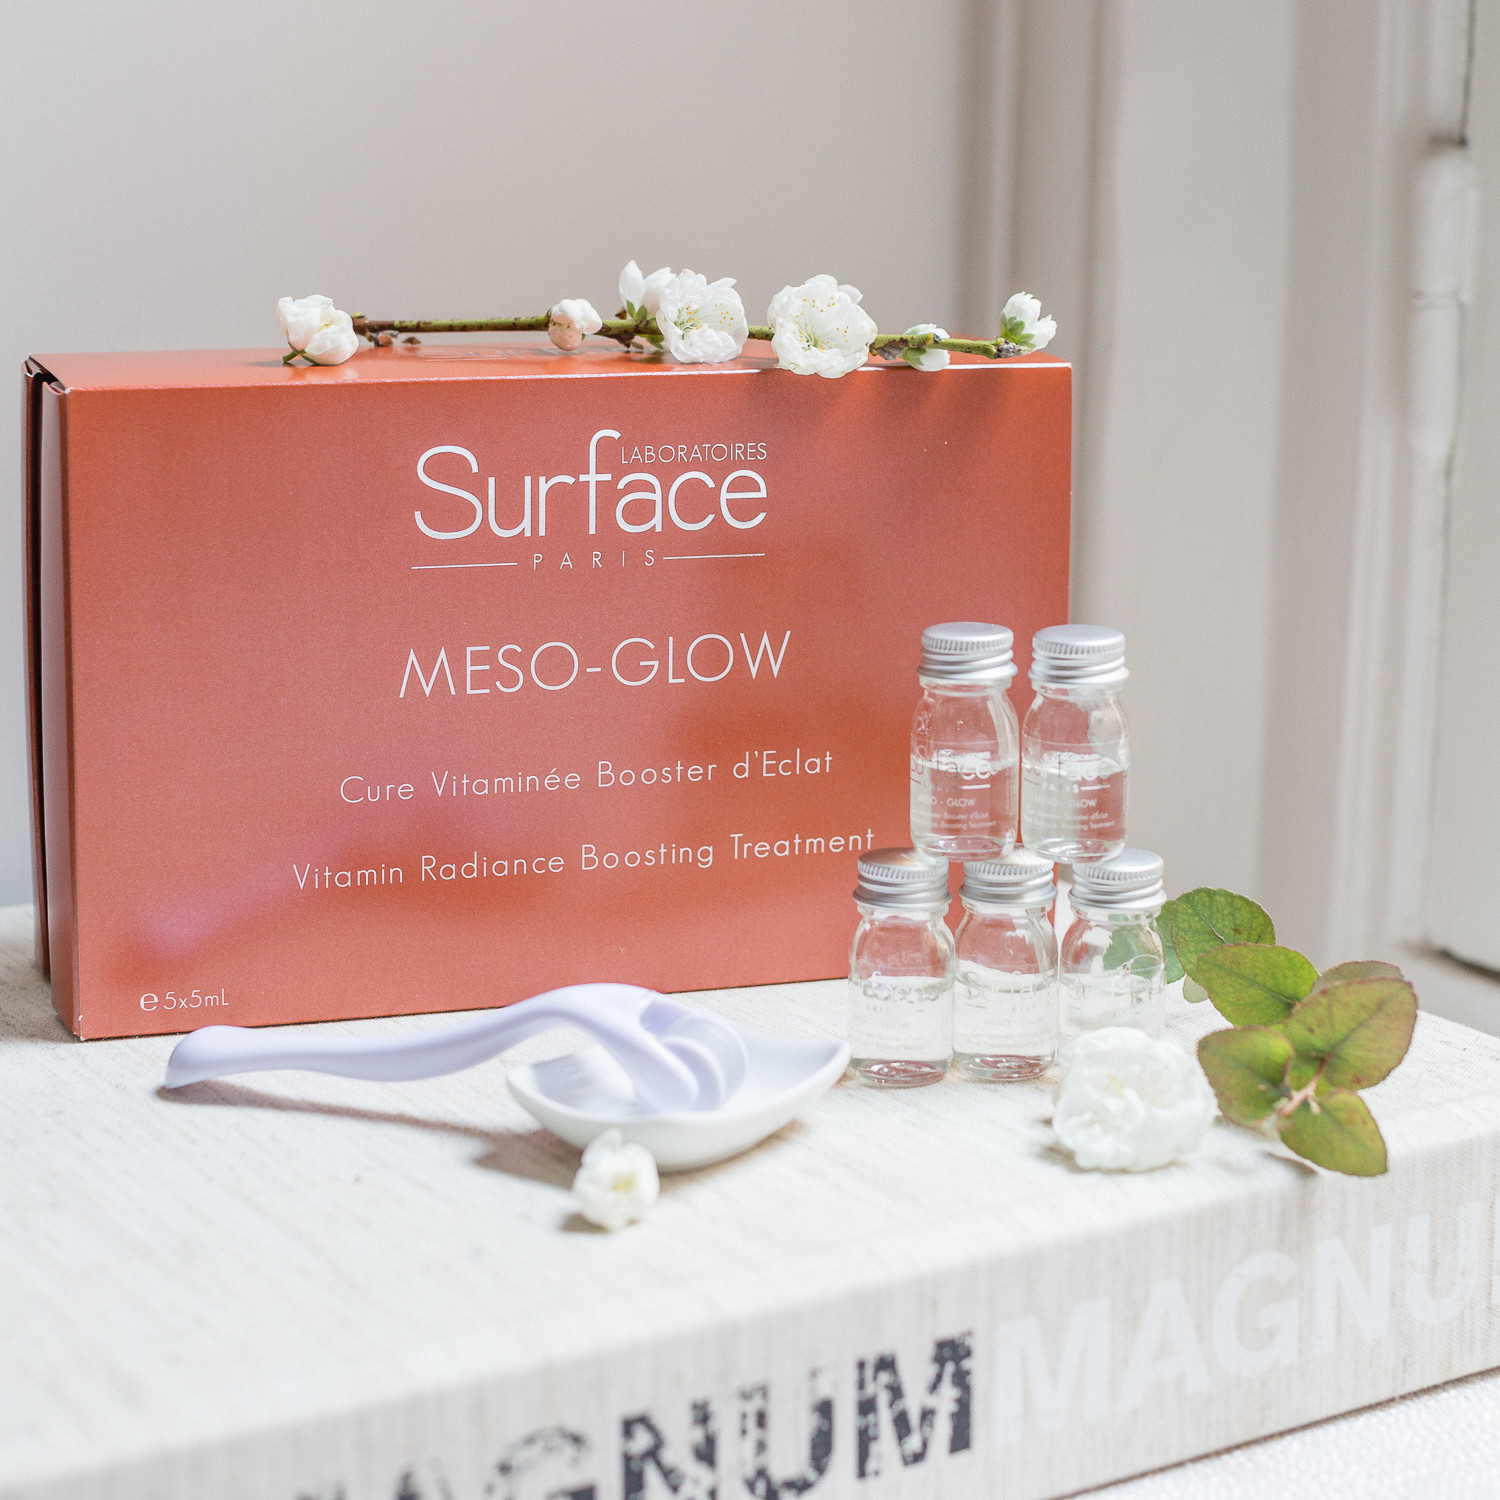 Surface Paris At Home Mesotherapy MESO-GLOW